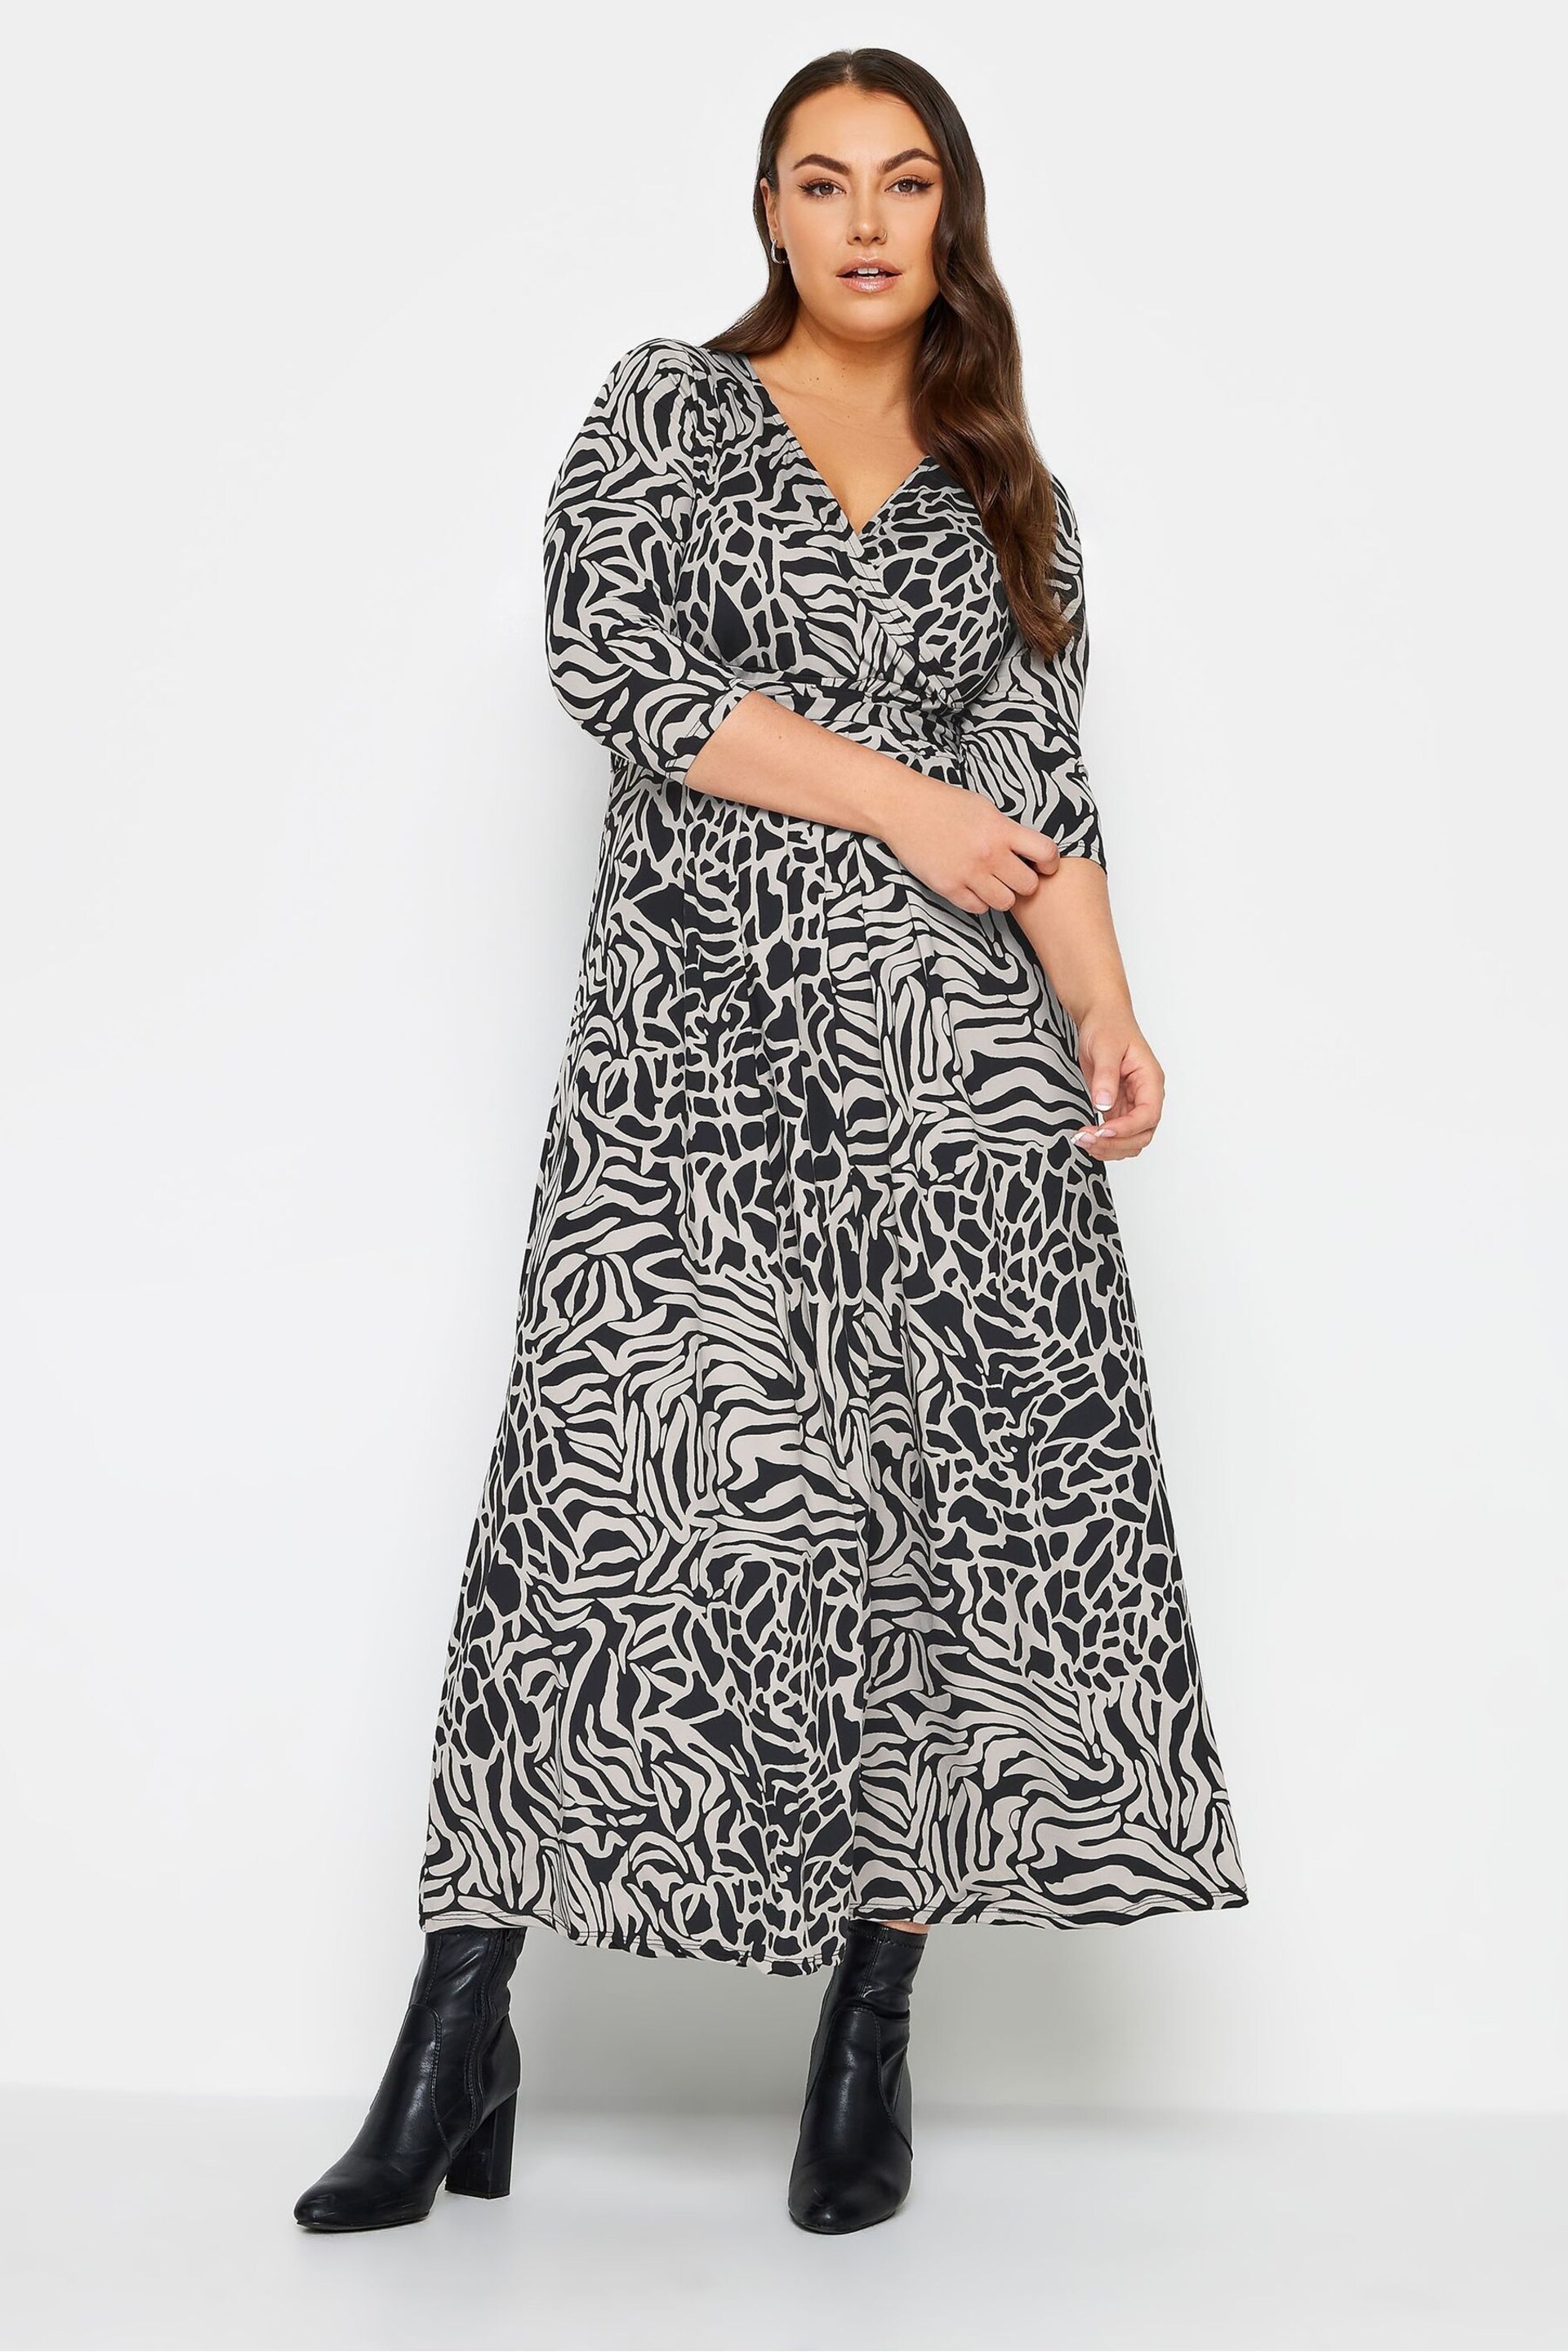 Yours Curve Black/White Maxi Wrap Dress - Image 1 of 4